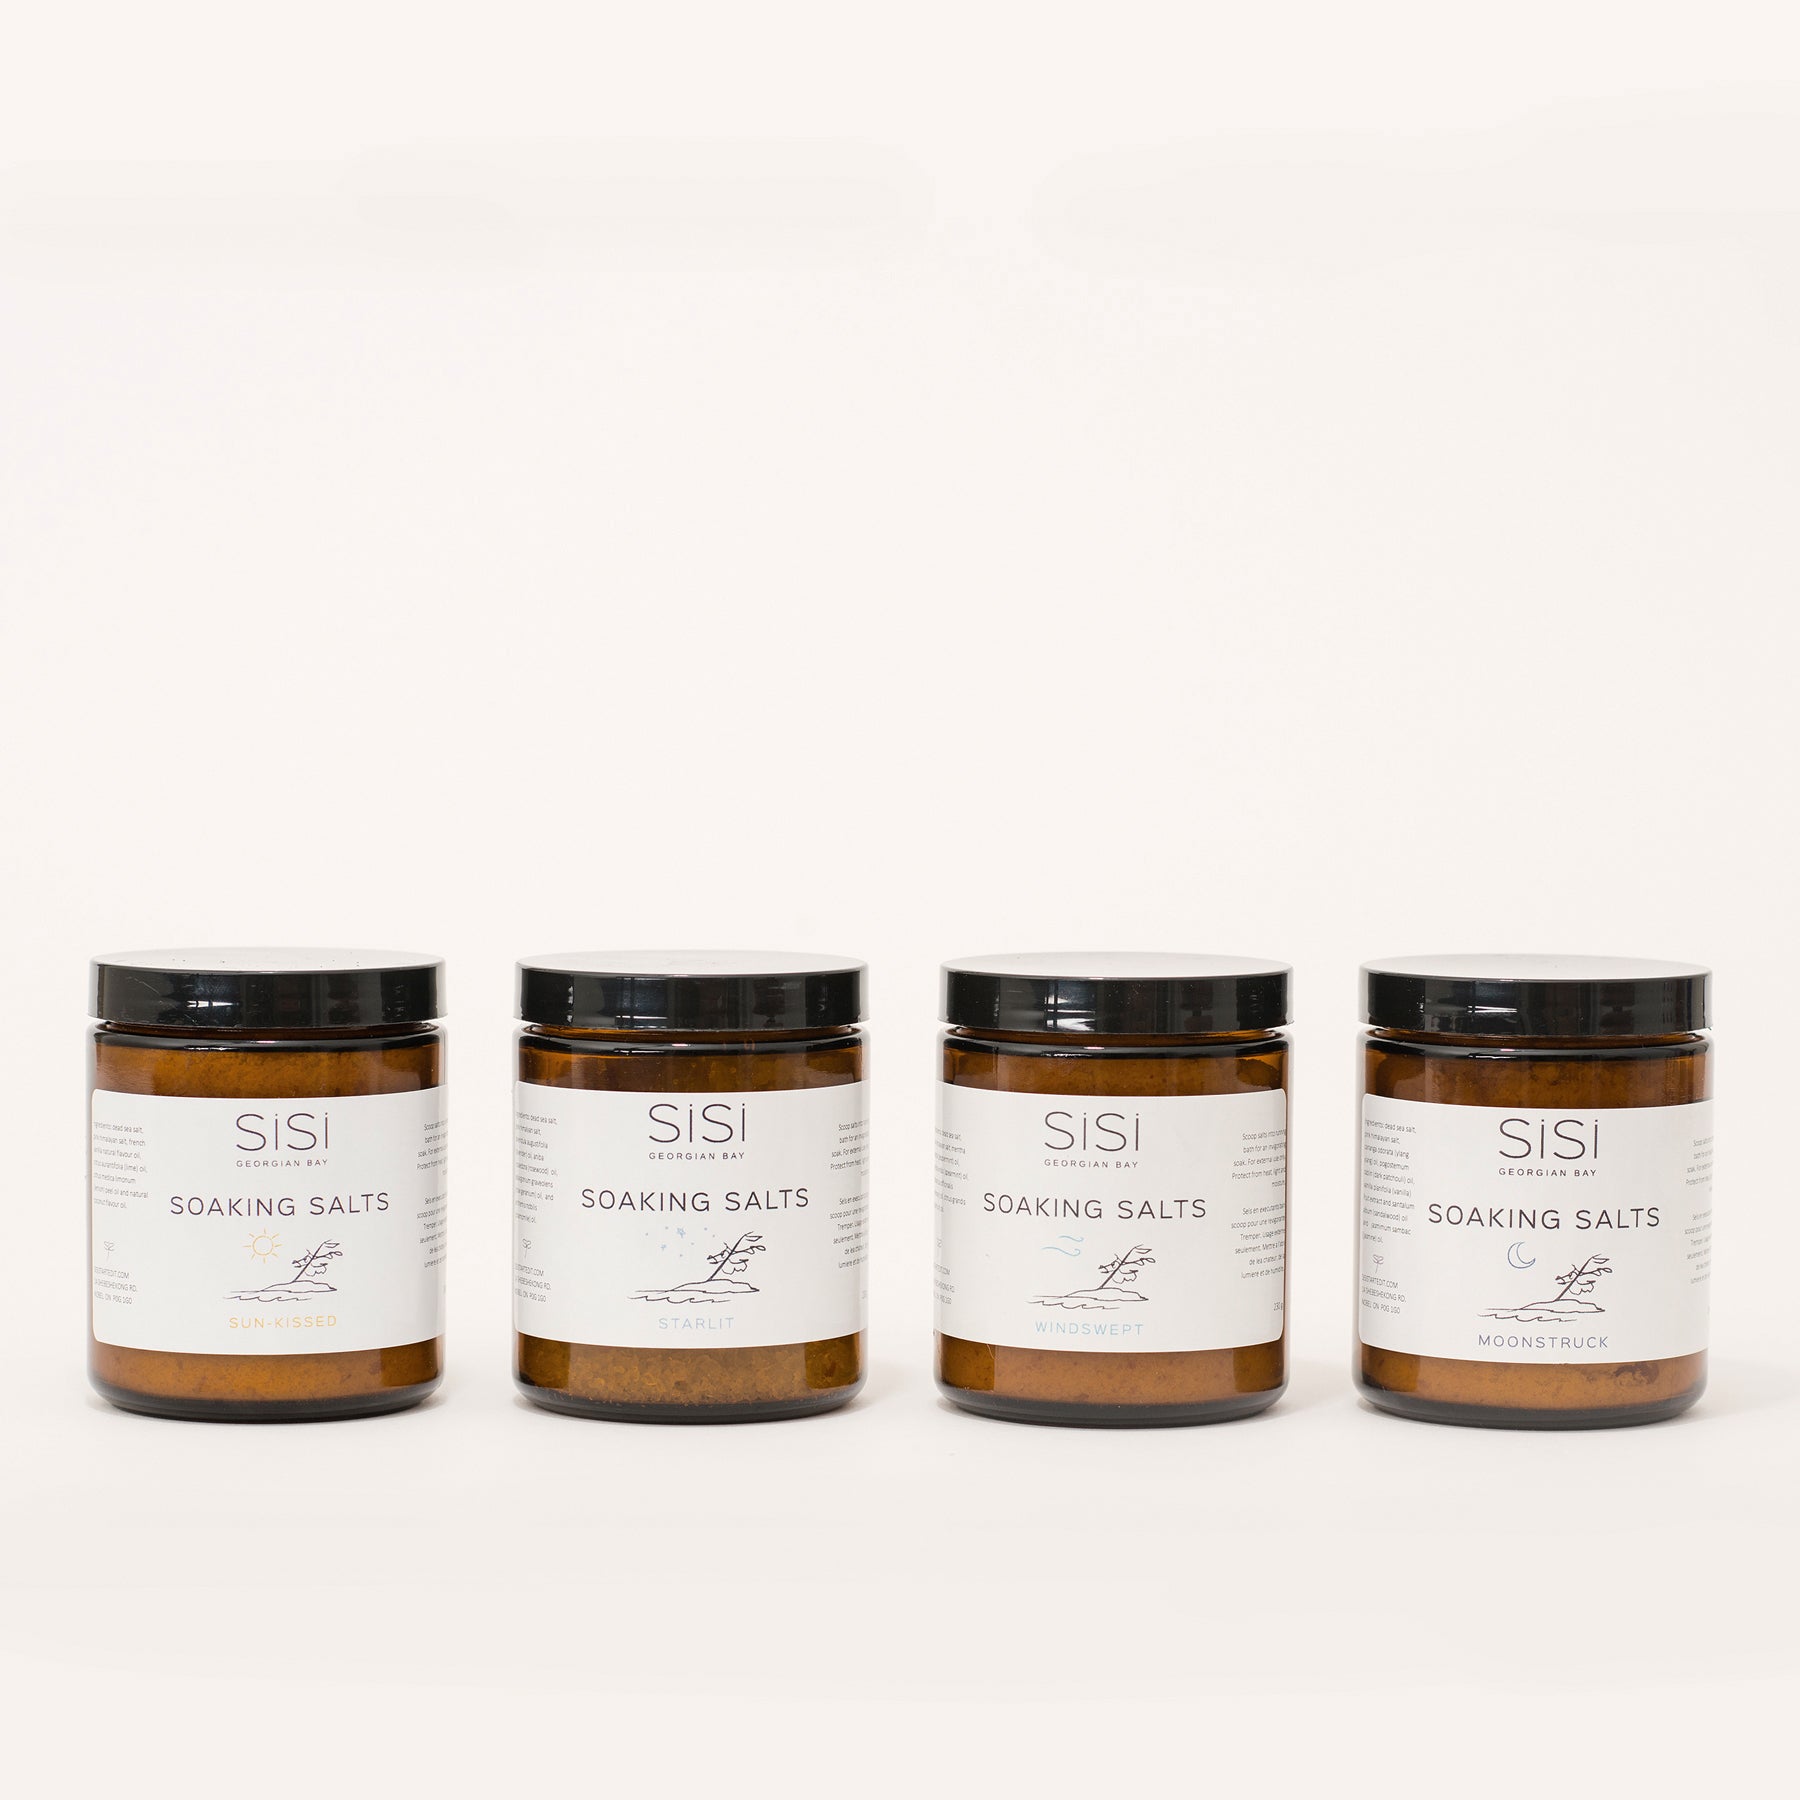 Natural skincare products - Apothecary Bath and Body Products - SiSi Georgian Bay Soaking Salts in amber glass jars with nature inspired artsy labels on a creamy white background